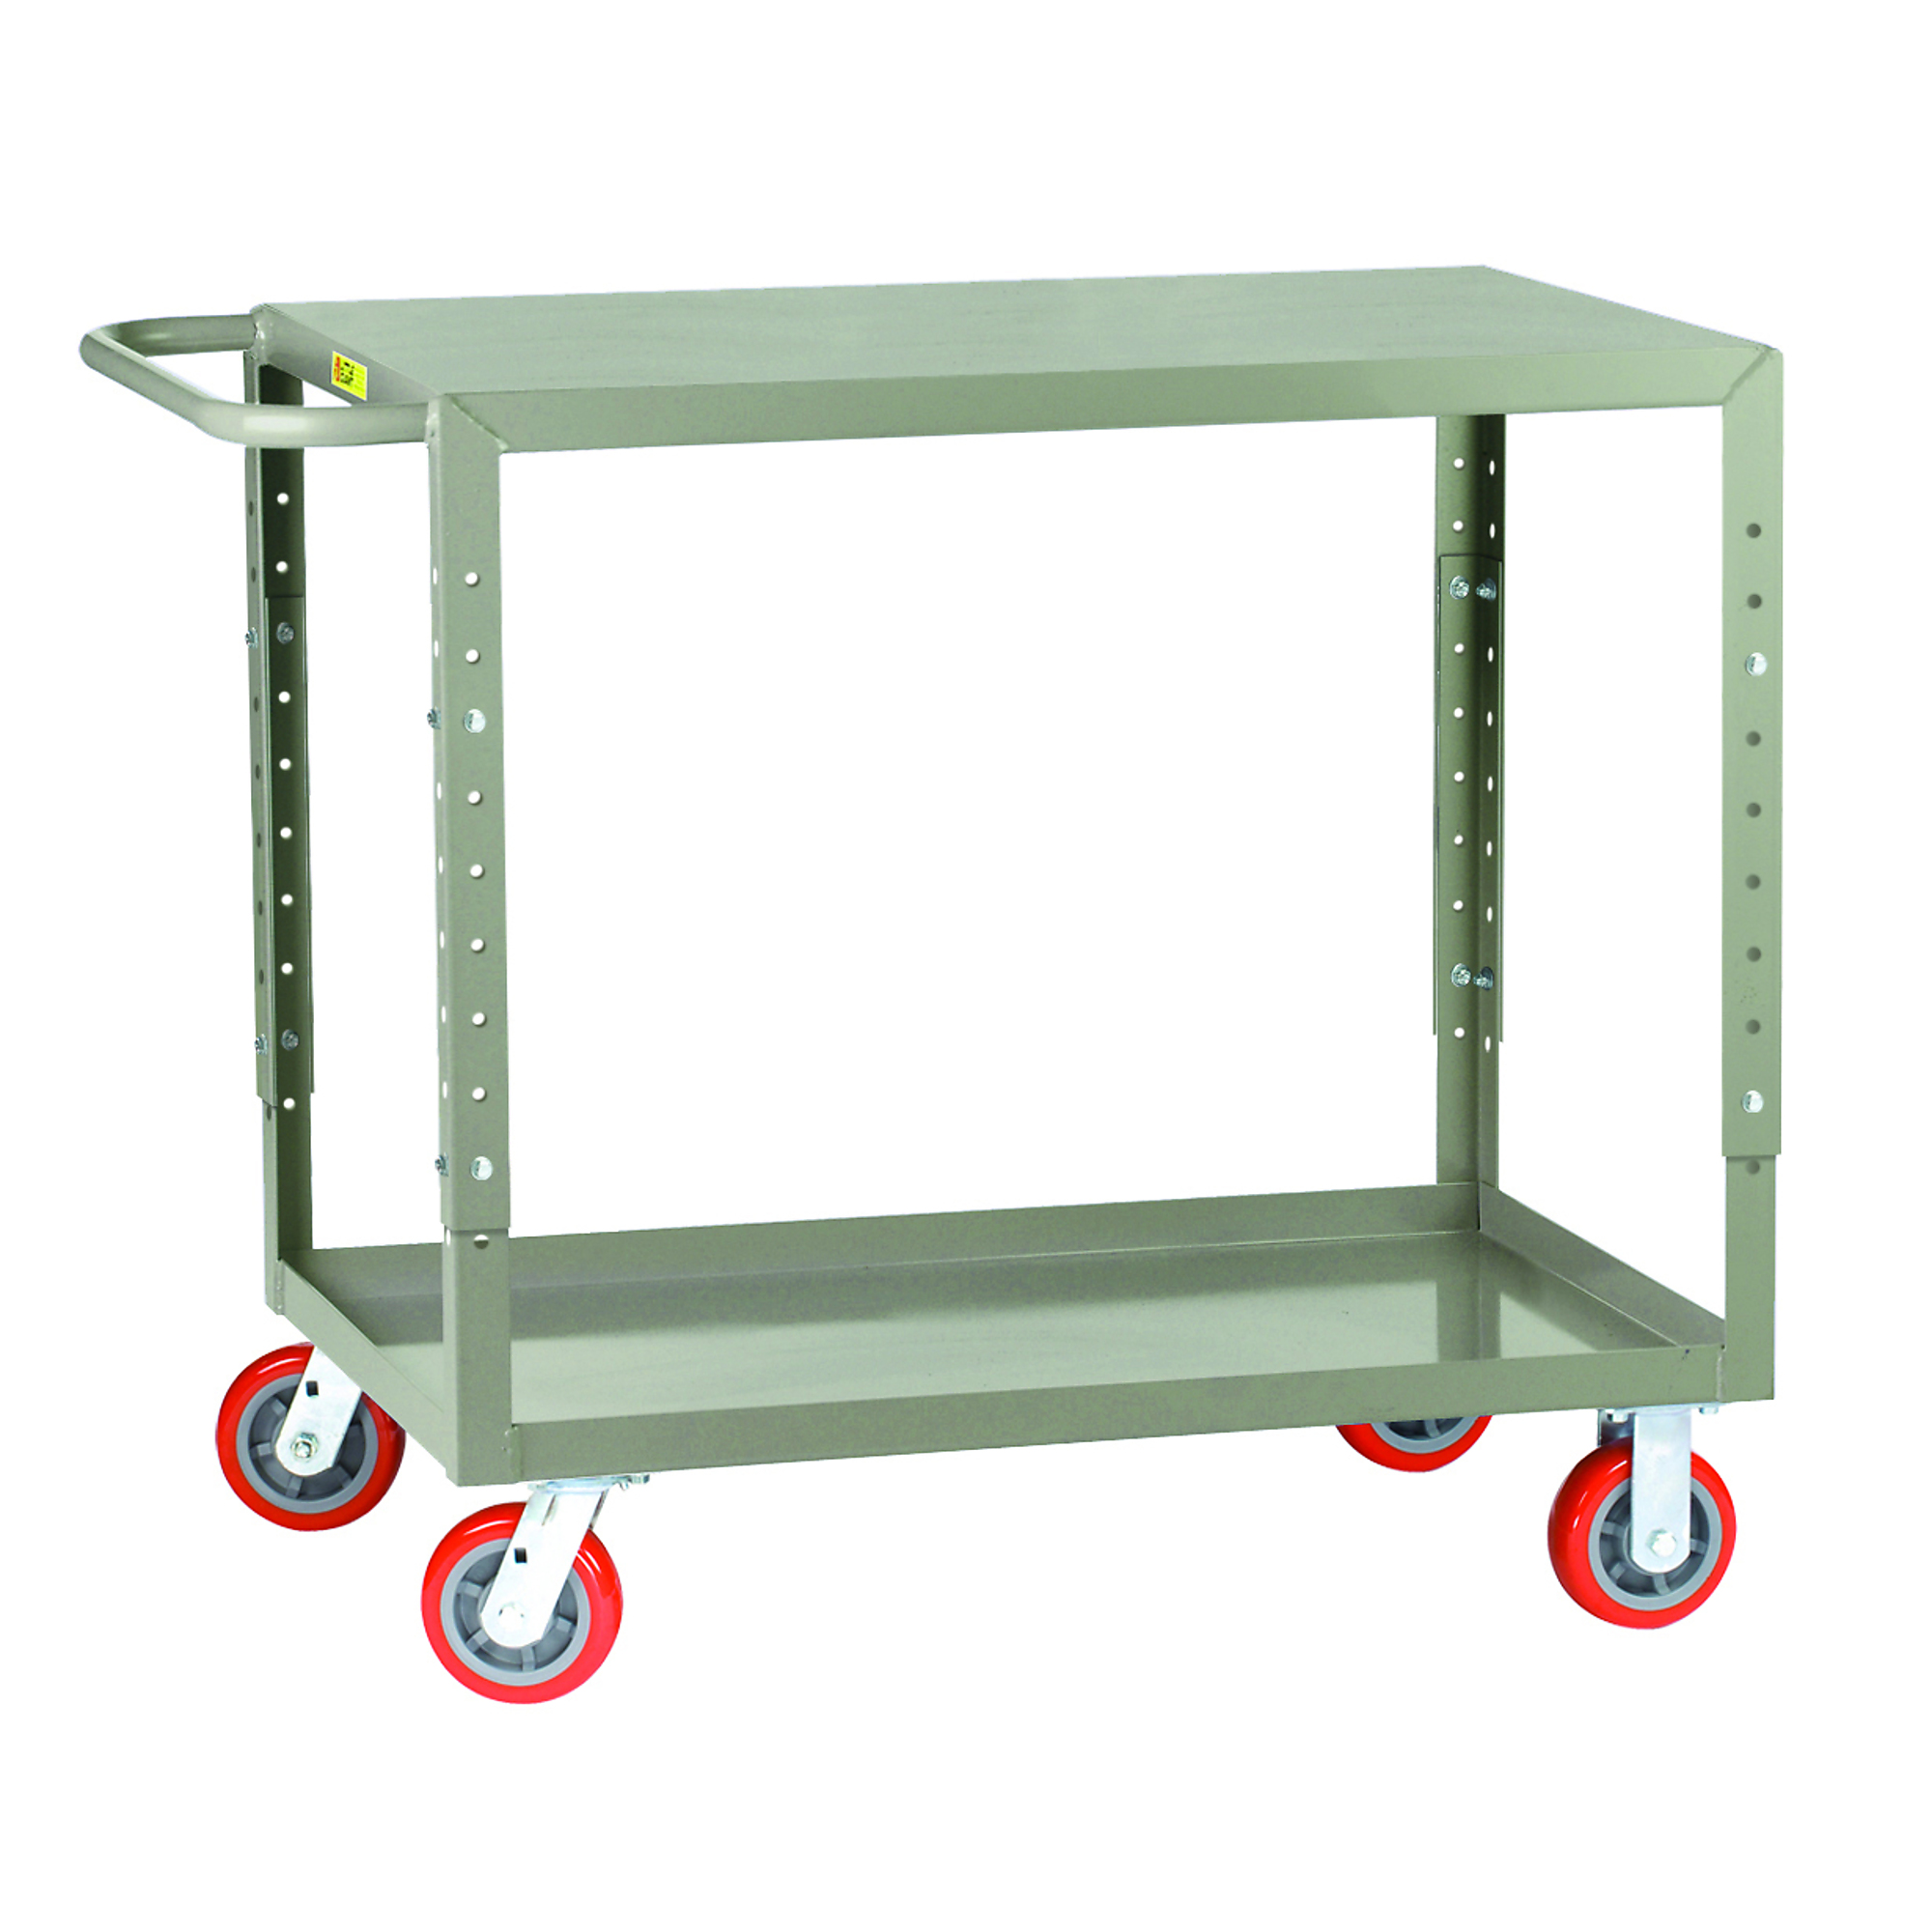 Little Giant, Adj. Height Welded Service Cart, 24x36, 1200 lbs, Total Capacity 1200 lb, Shelves (qty.) 2, Material Carbon Steel, Model LG-2436-5PYBKAH